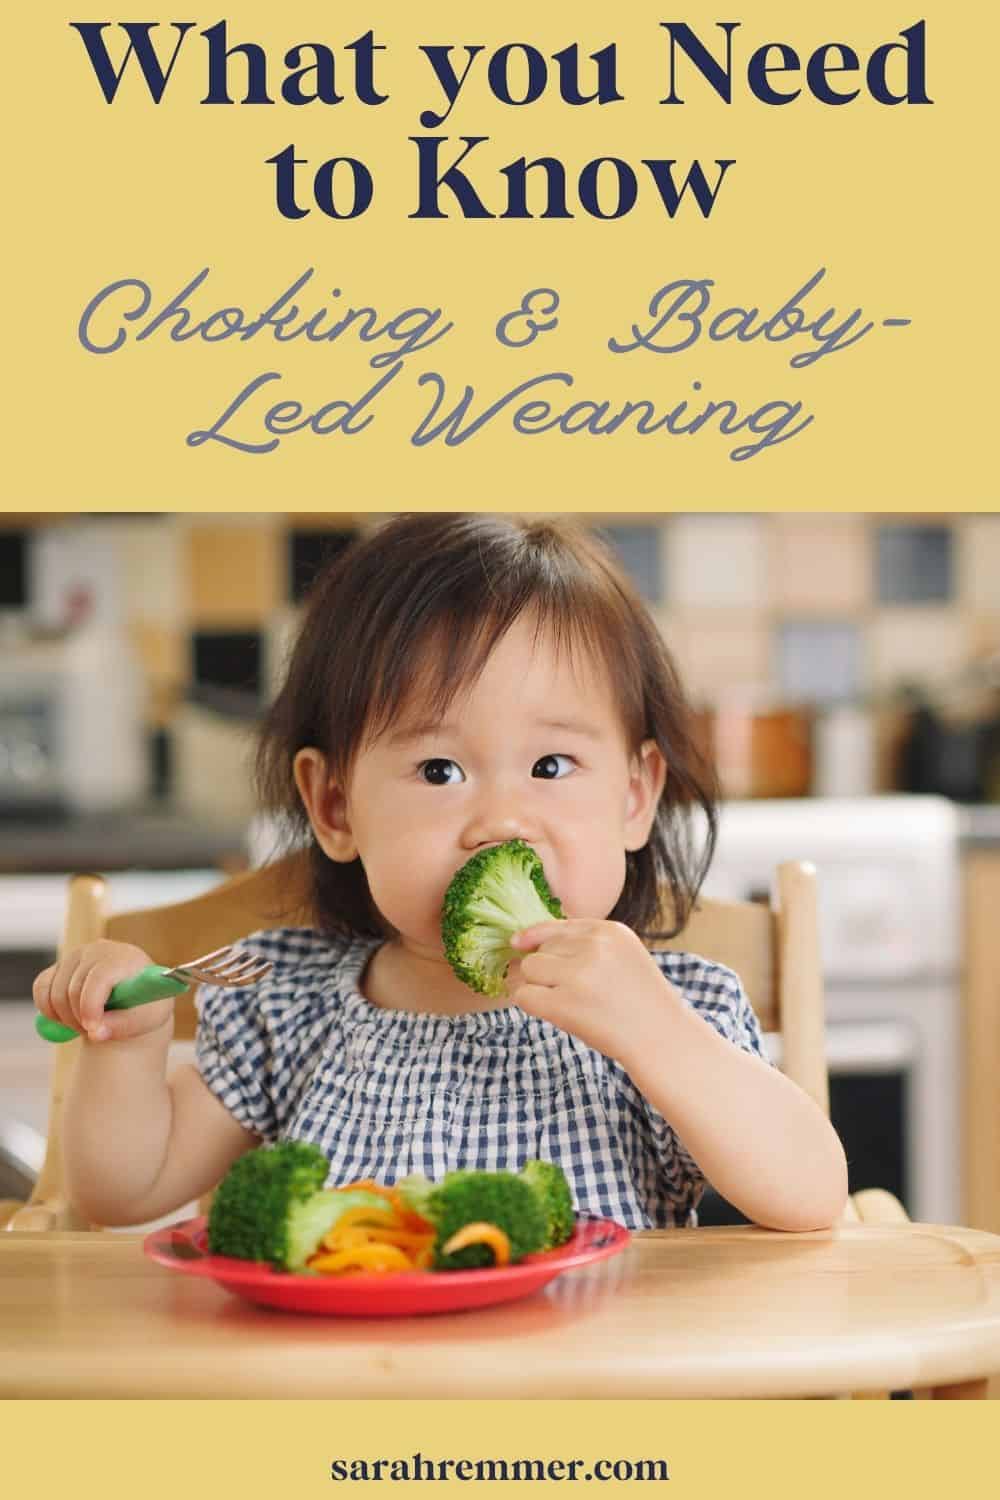 What you Need to Know. Choking and Baby-Led Weaning